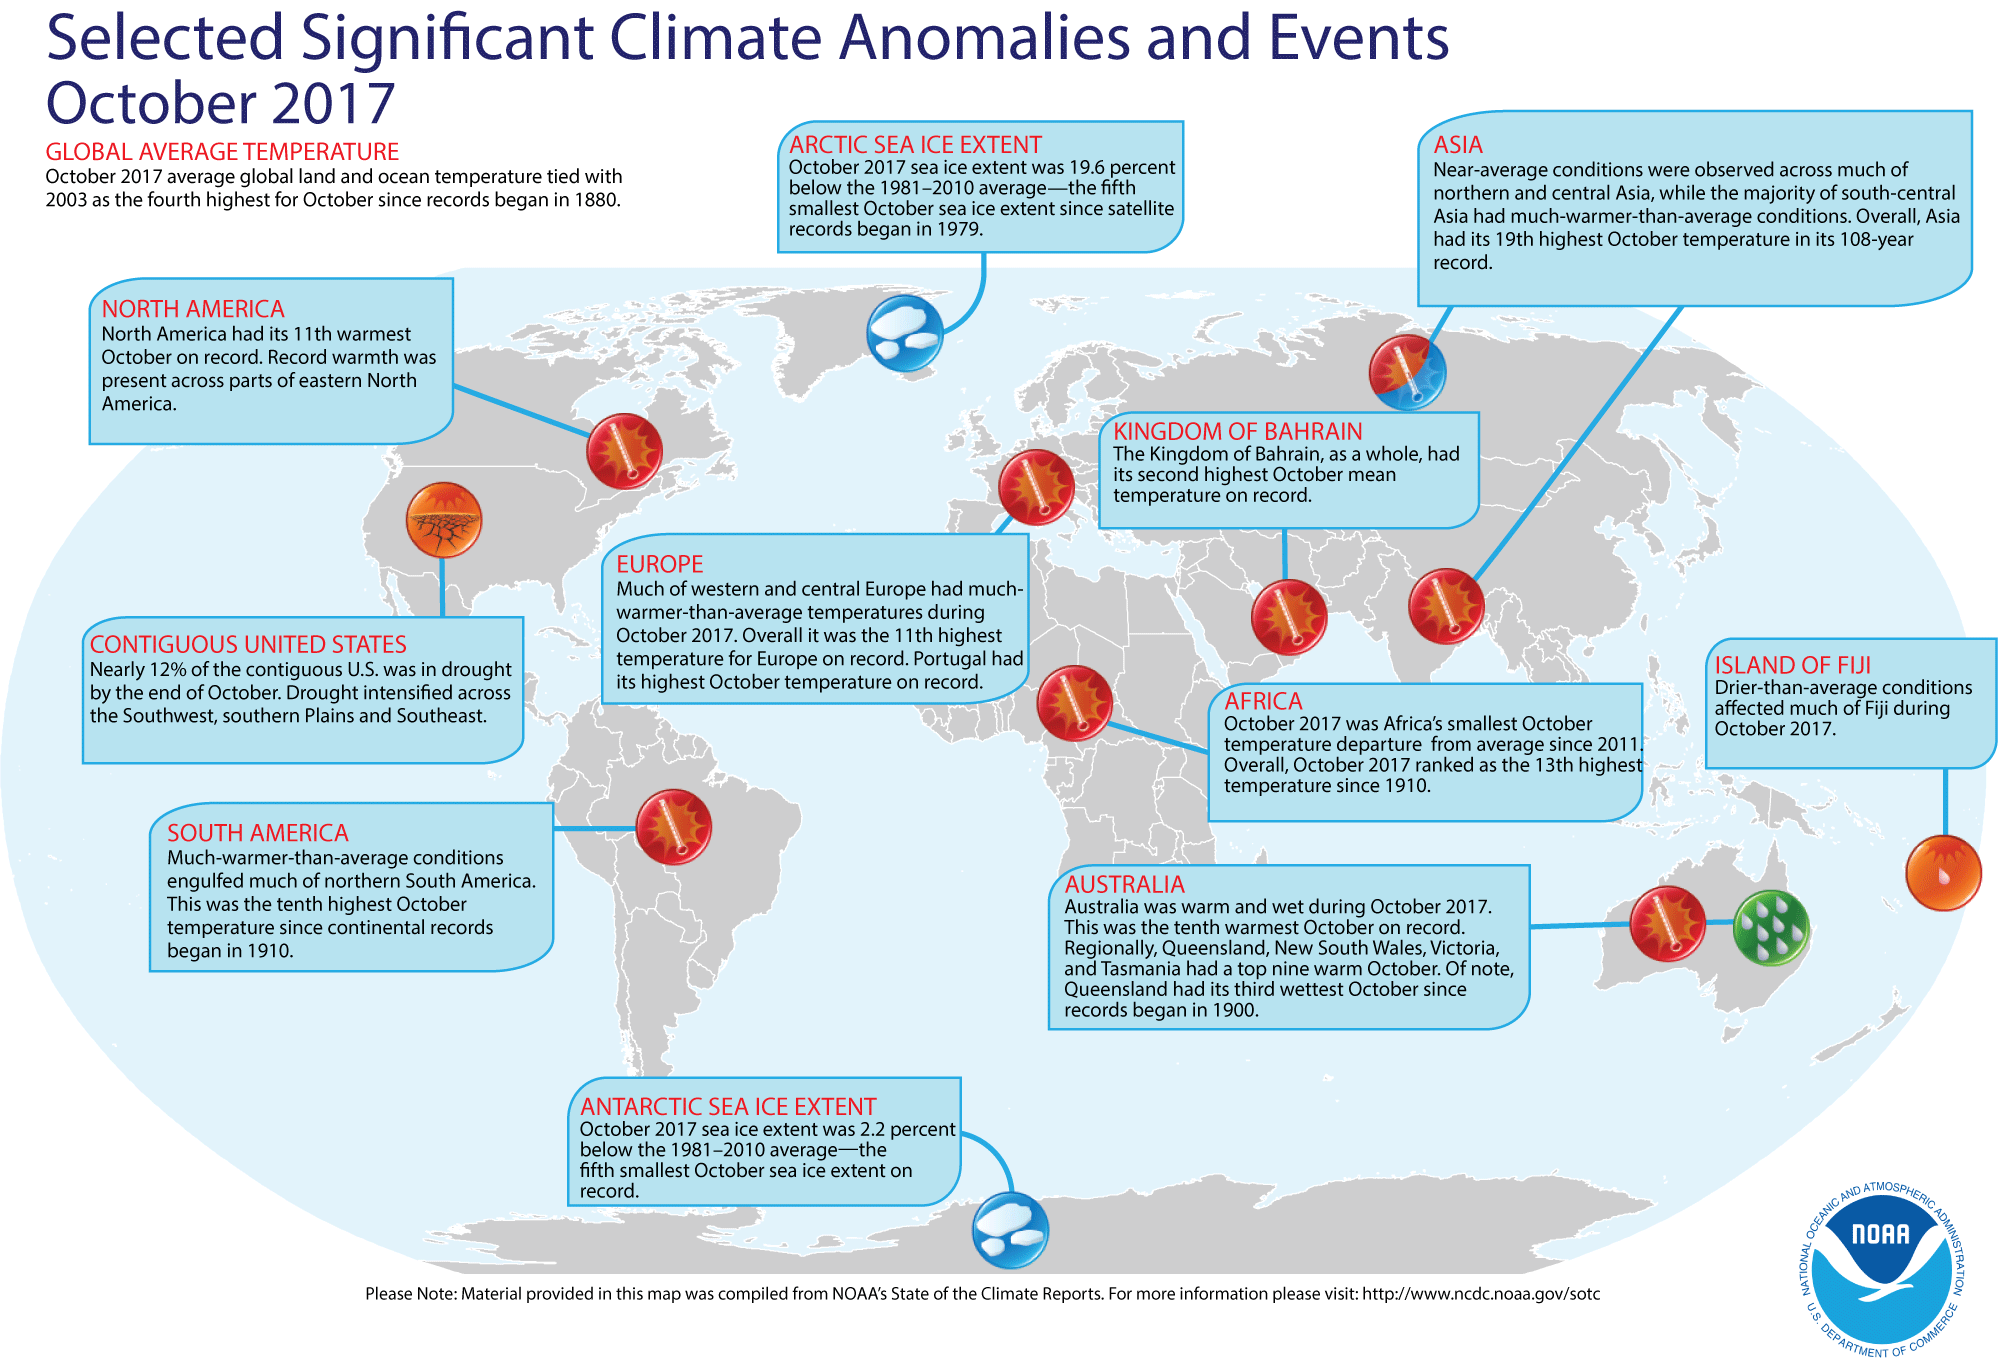 See this map of notable climate events that occurred around the world in October 2017.